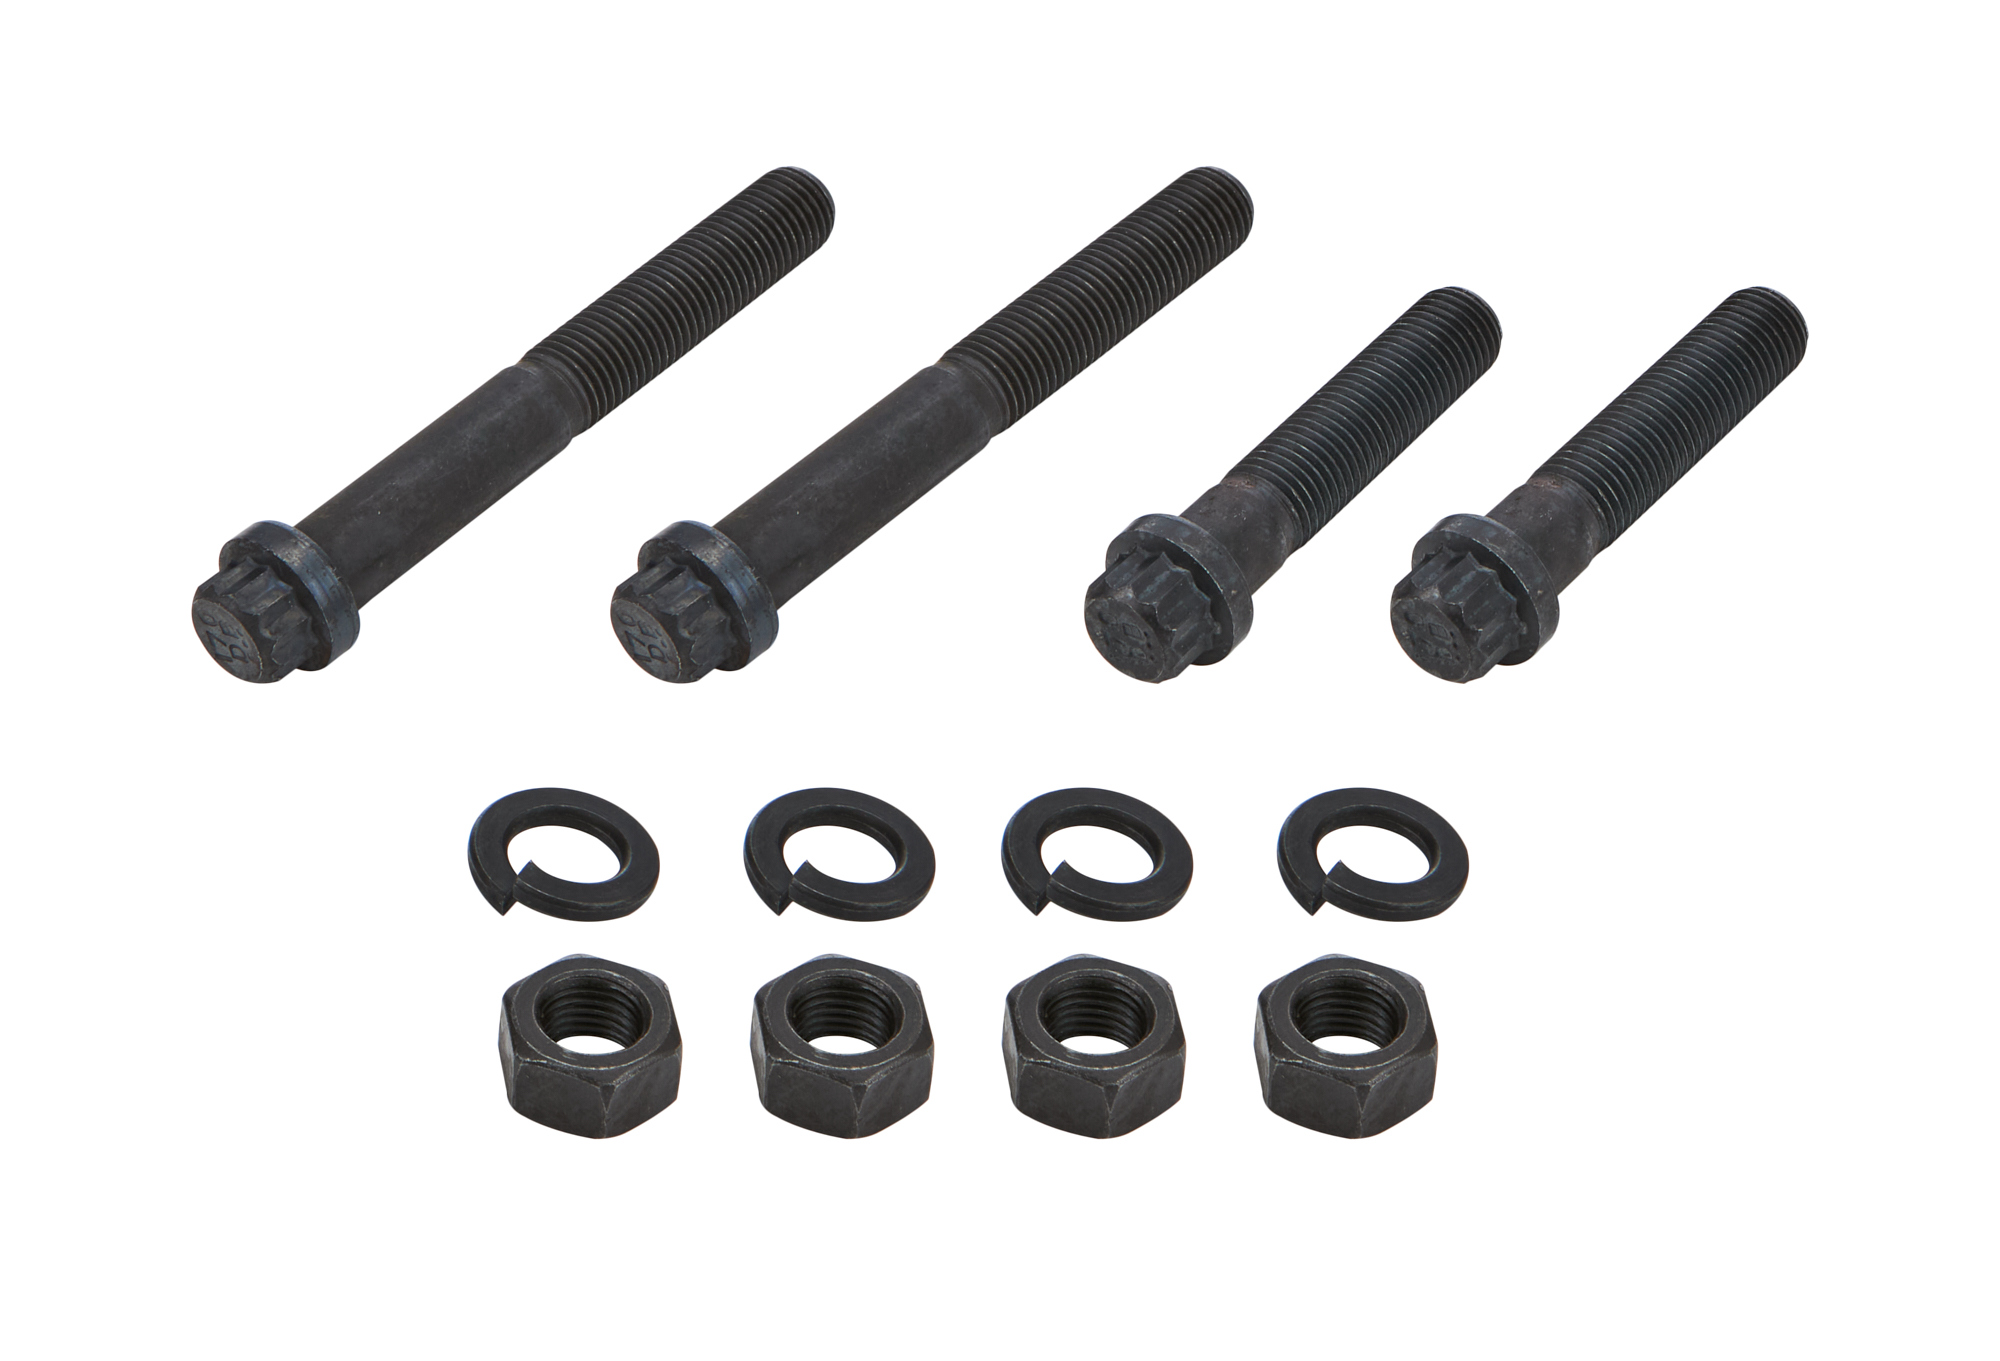 Allstar Performance 55963 Spindle Hardware, 7/16-20 Thread, Two 3-1/4 in Bolts, Two 2 in Long Bolts, 12 Point Head, Lock Washers / Nuts Included, Steel, Black Oxide, Kit